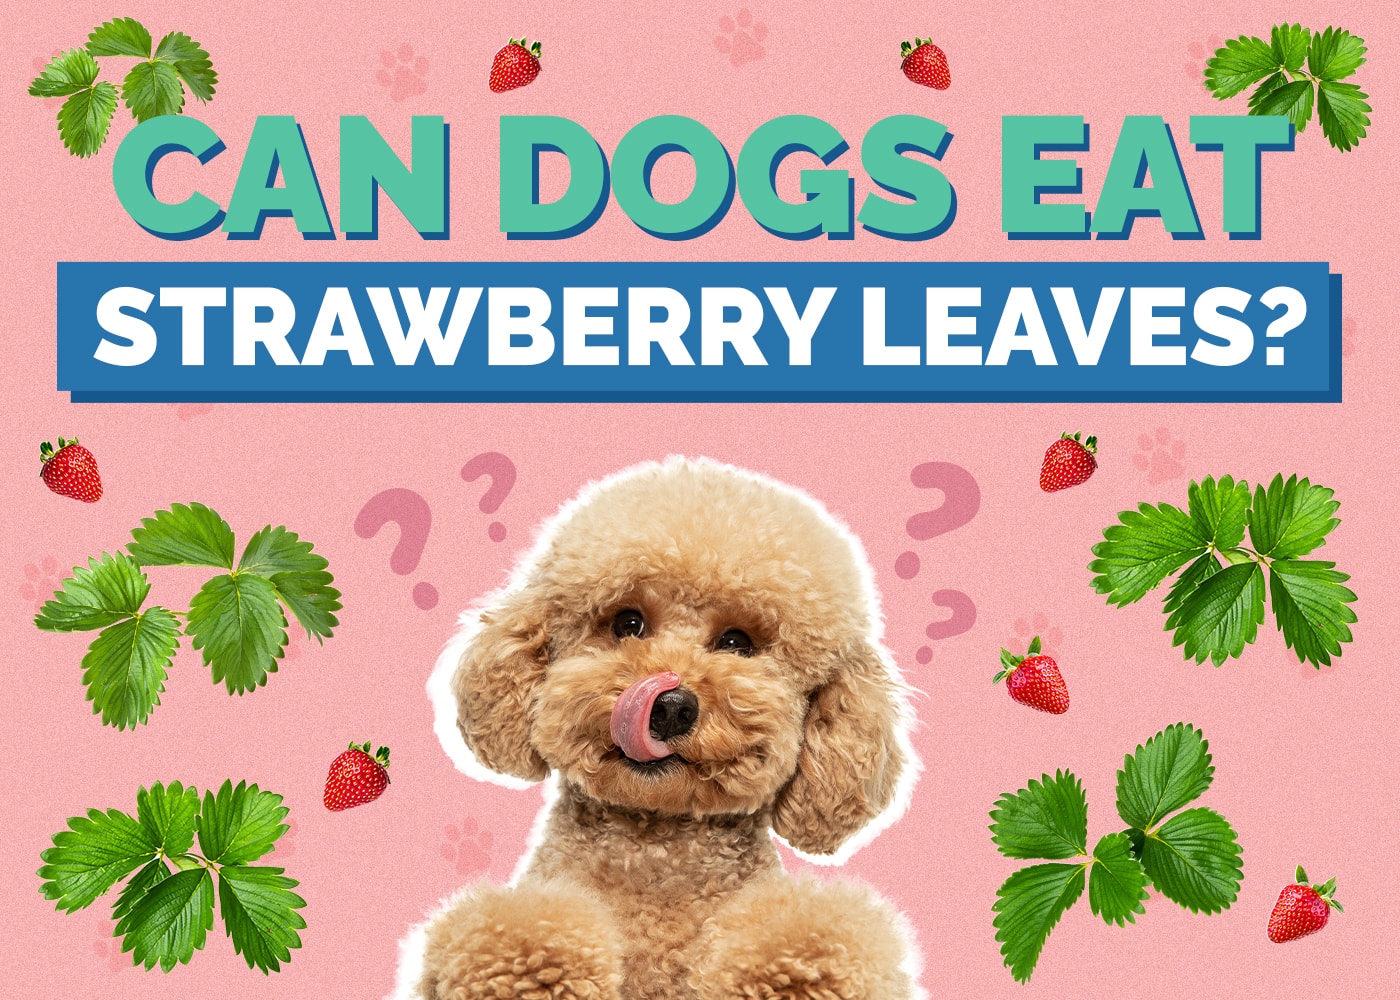 Can Dogs Eat Strawberry Leaves